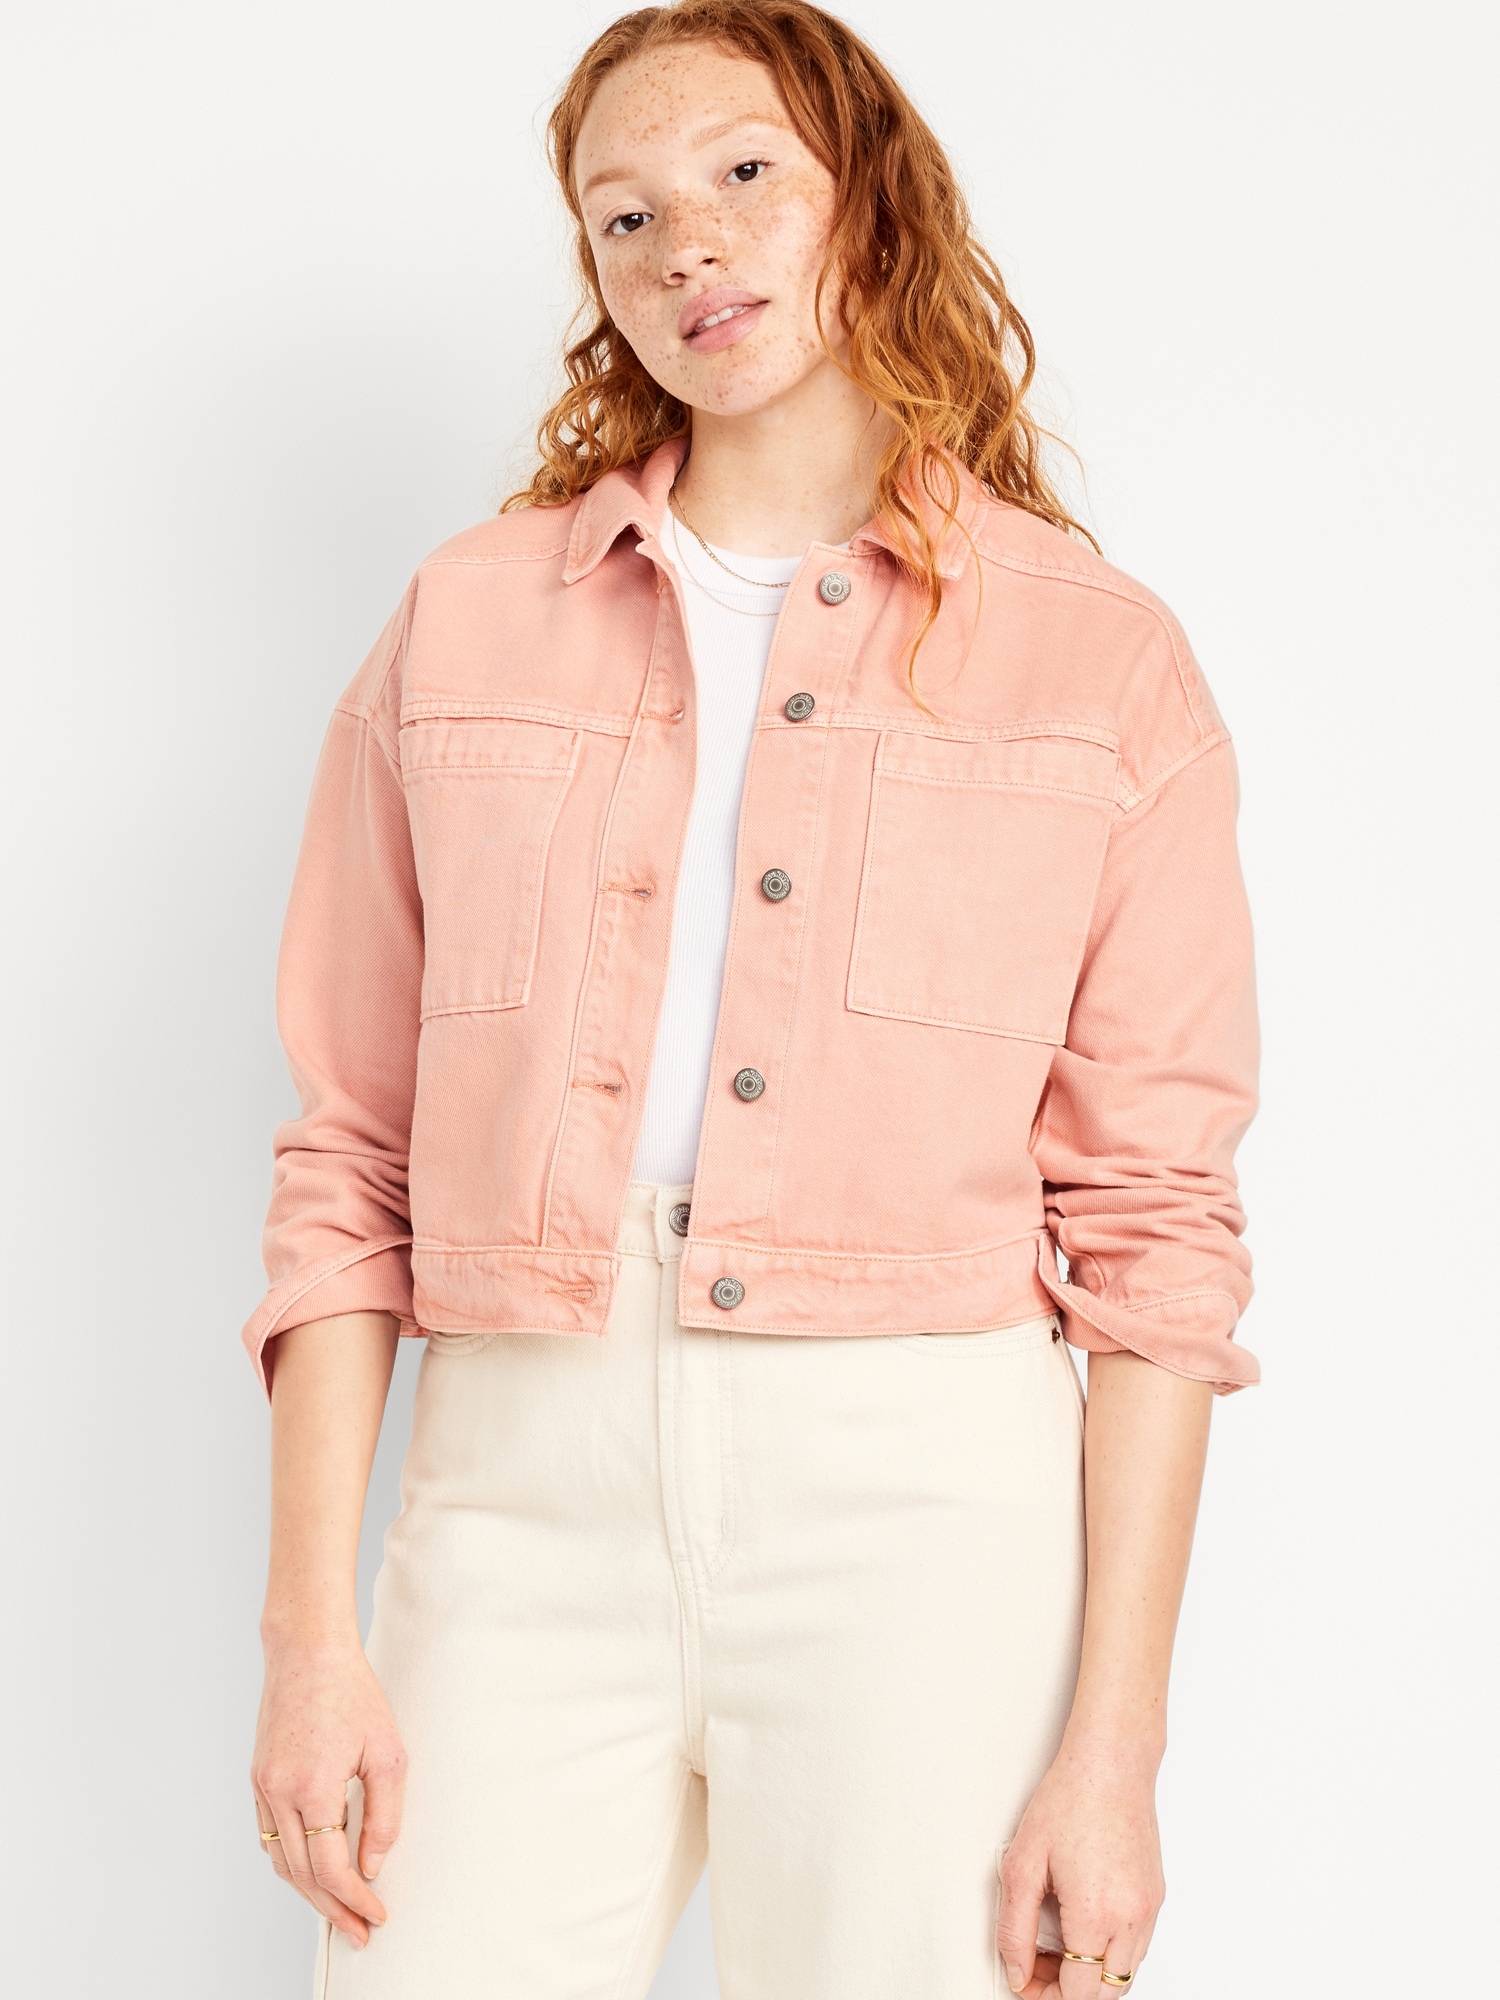 Cropped Utility Jean Jacket Hot Deal